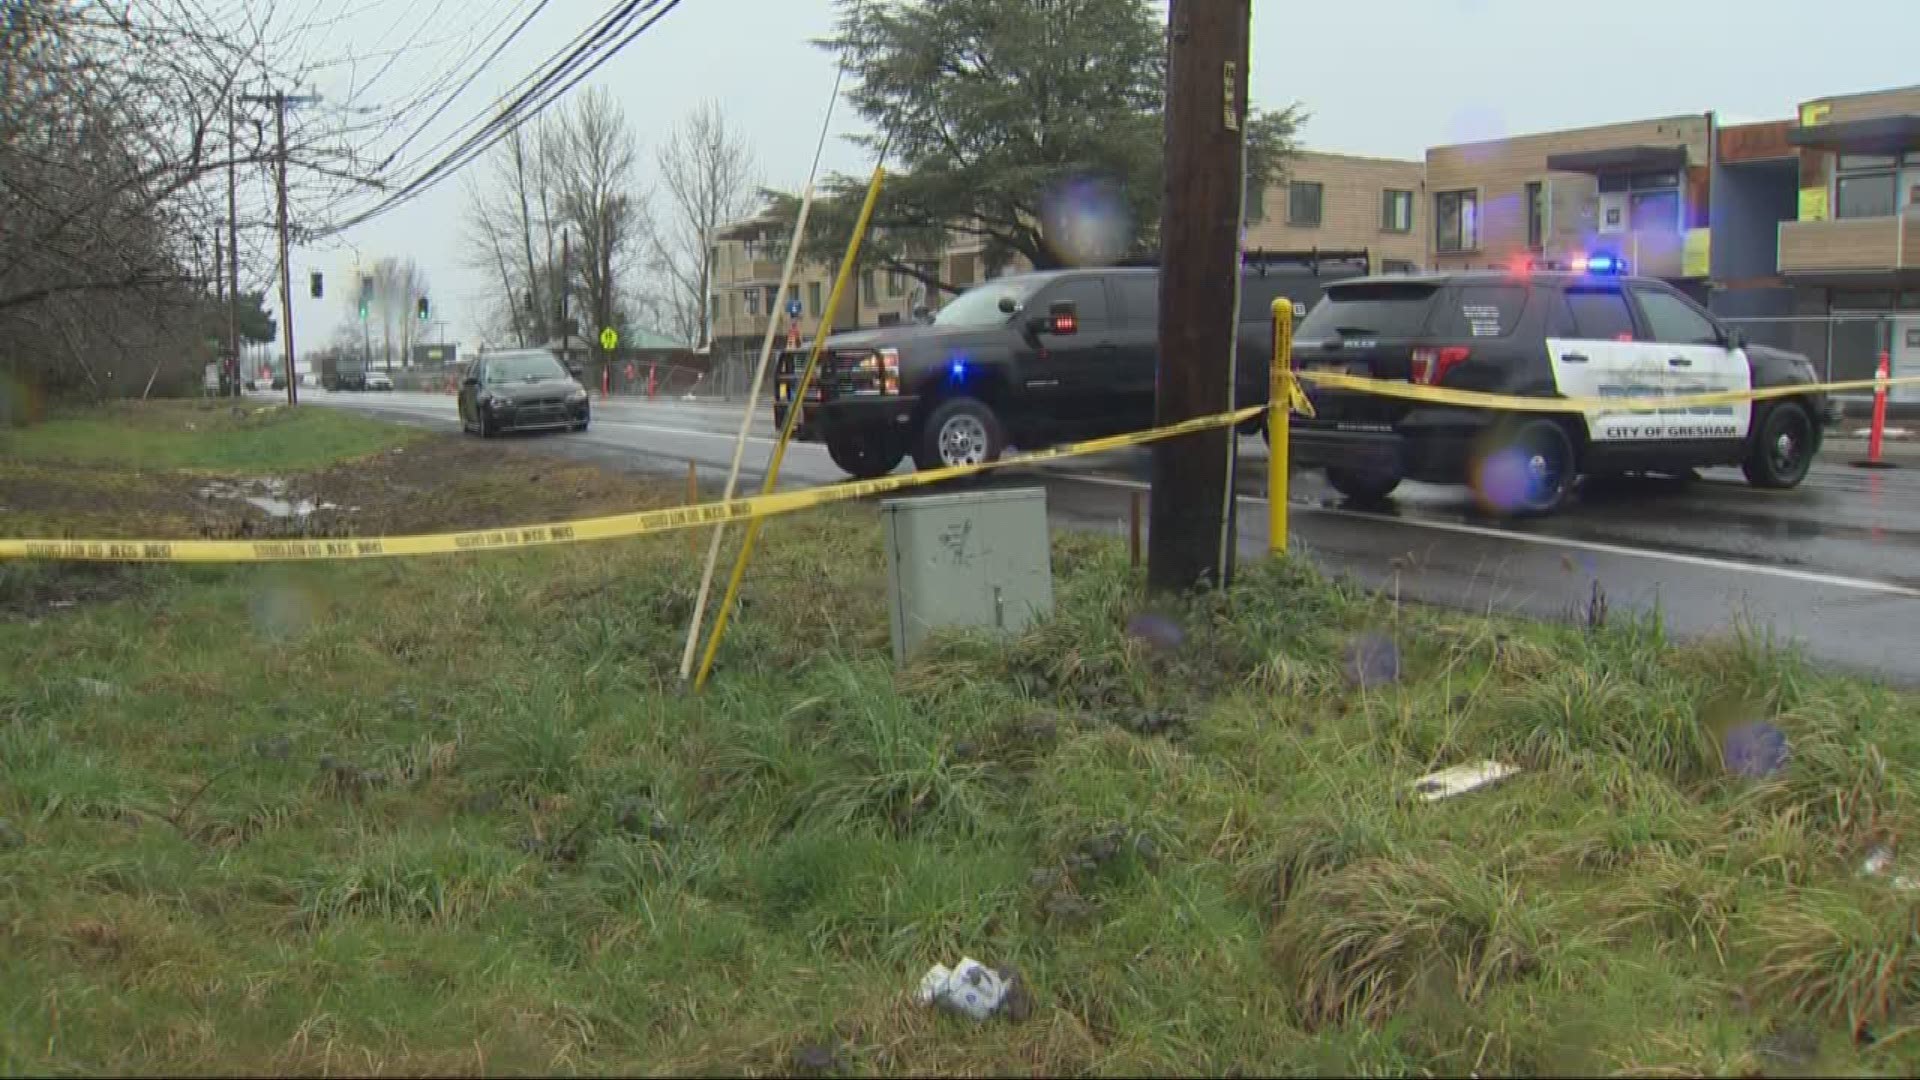 A middle school student walking legally in a crosswalk was struck and killed in Gresham.